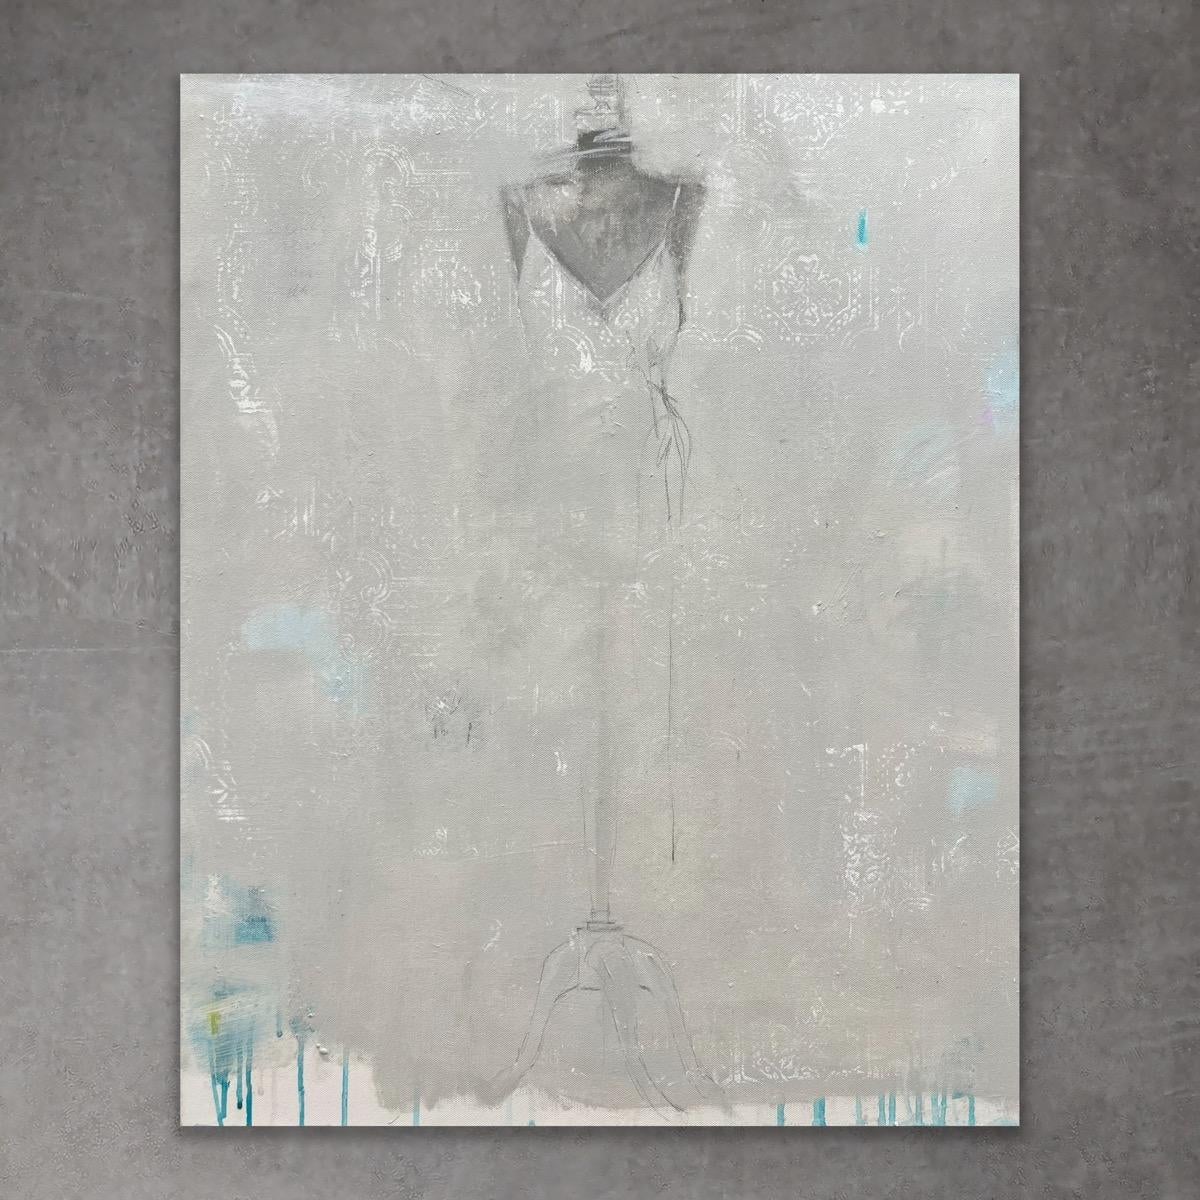 Underdressed - 24”x30”, Dress Painting, Figurative, Grey, White, Neutral, Blue